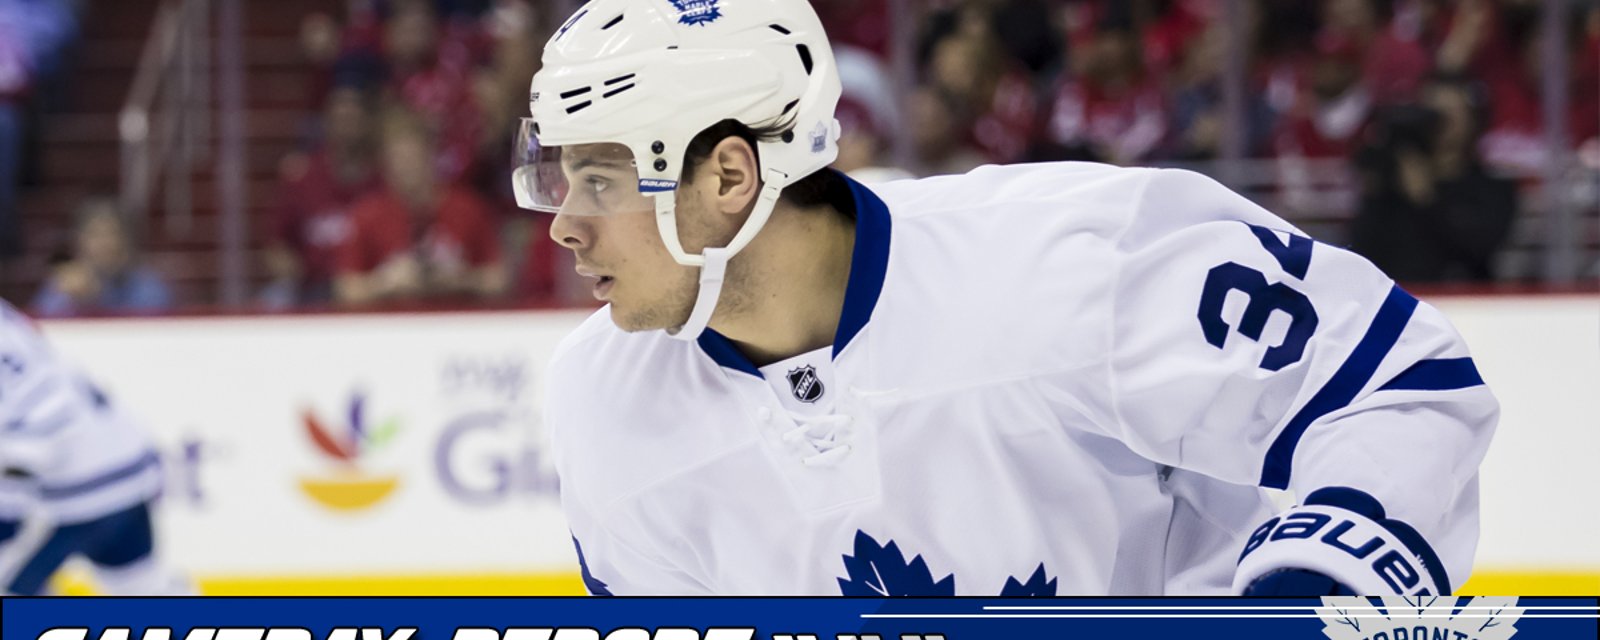 GAME DAY REPORT: Leafs shuffle lines, Matthews on the third line?